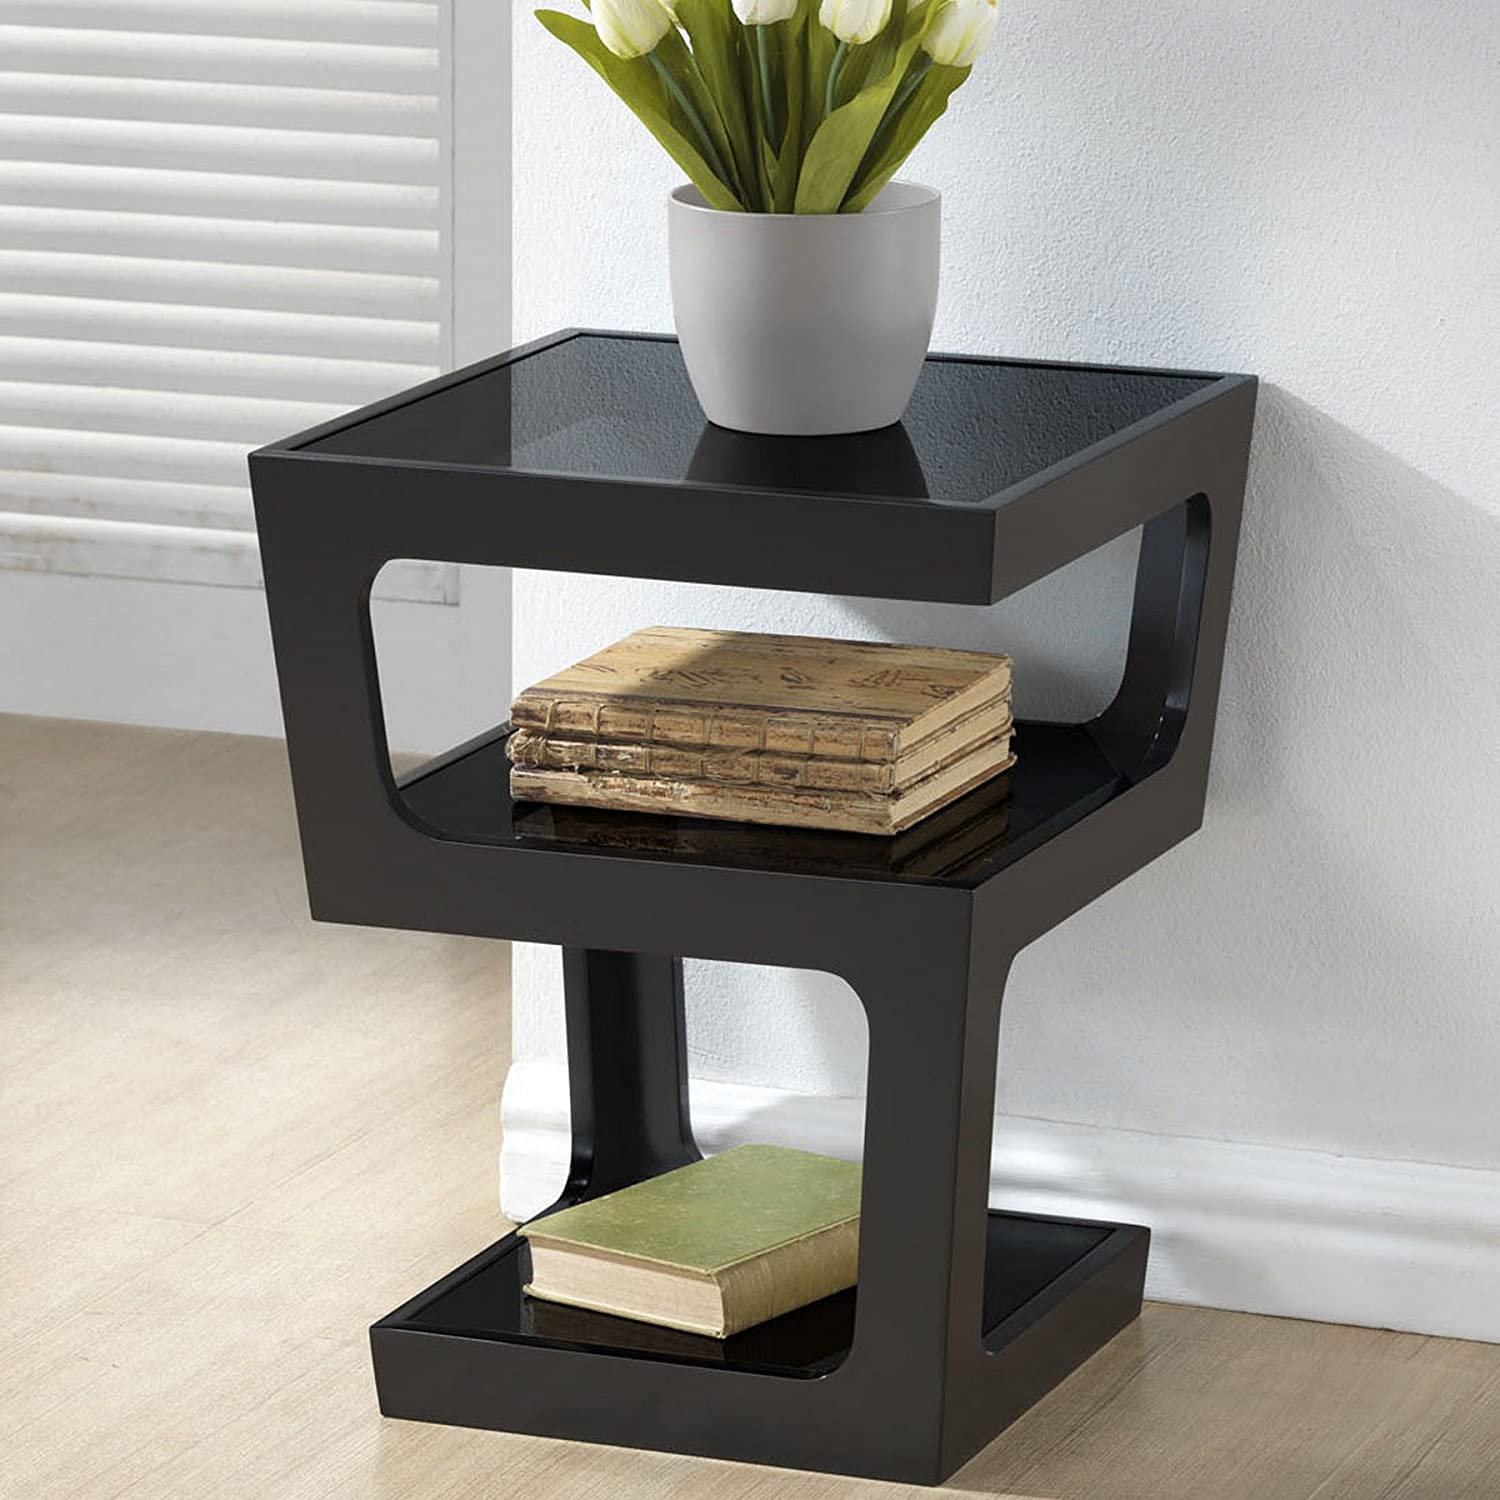 Baxton Studio Clara Modern End Table with 3-Tiered Glass Shelves, Black